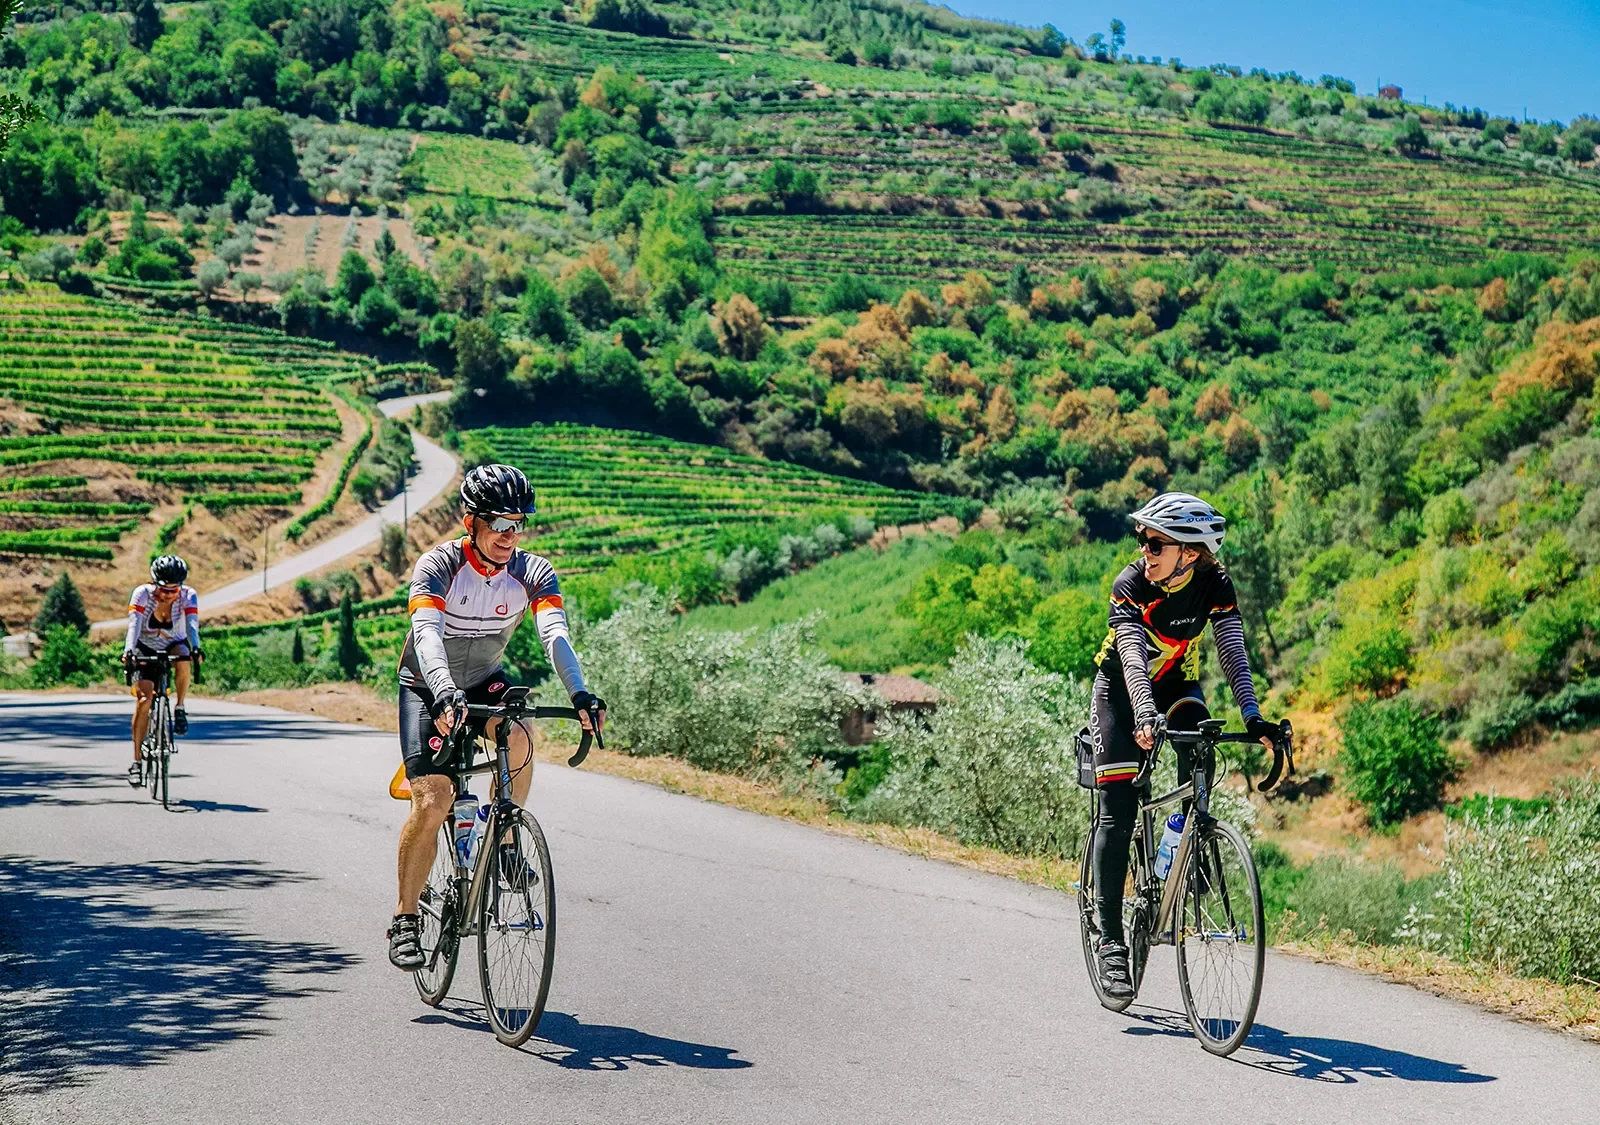 Three bikers riding on a road along the Douro River.